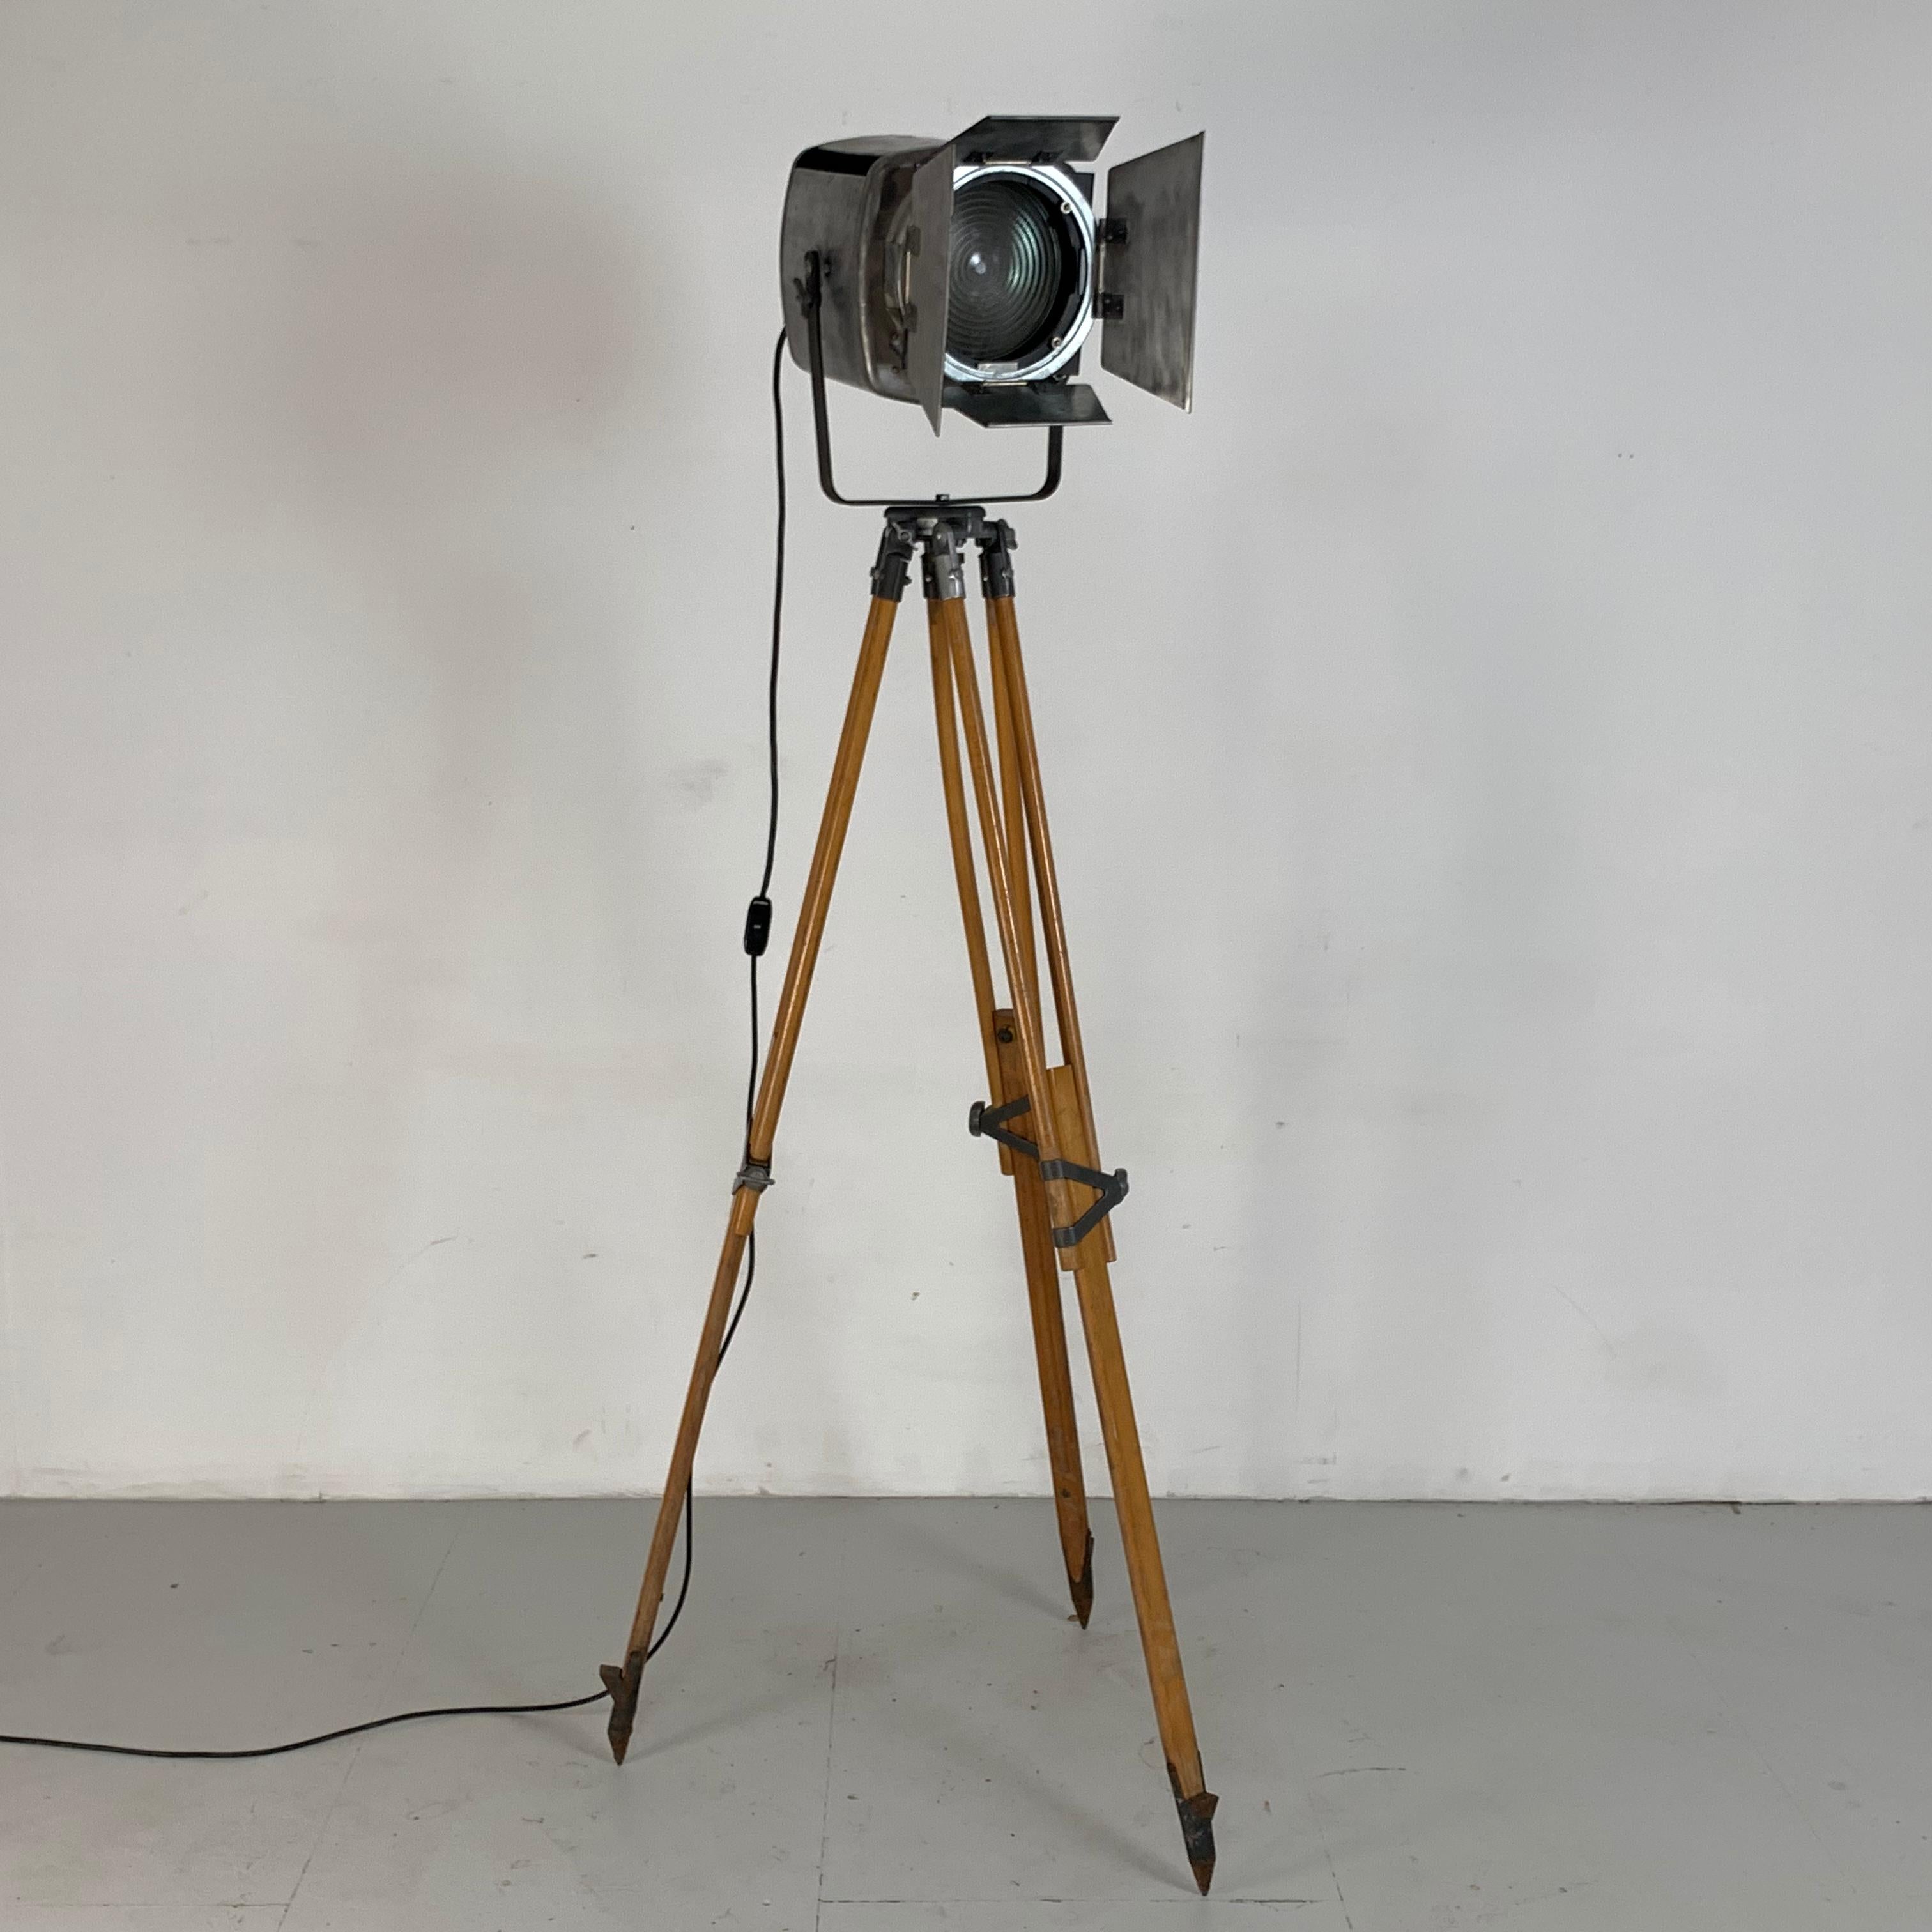 1960s Stripped and Polished Strand 743 Theatre Light on Vintage Wooden Tripod In Good Condition For Sale In Lewes, East Sussex